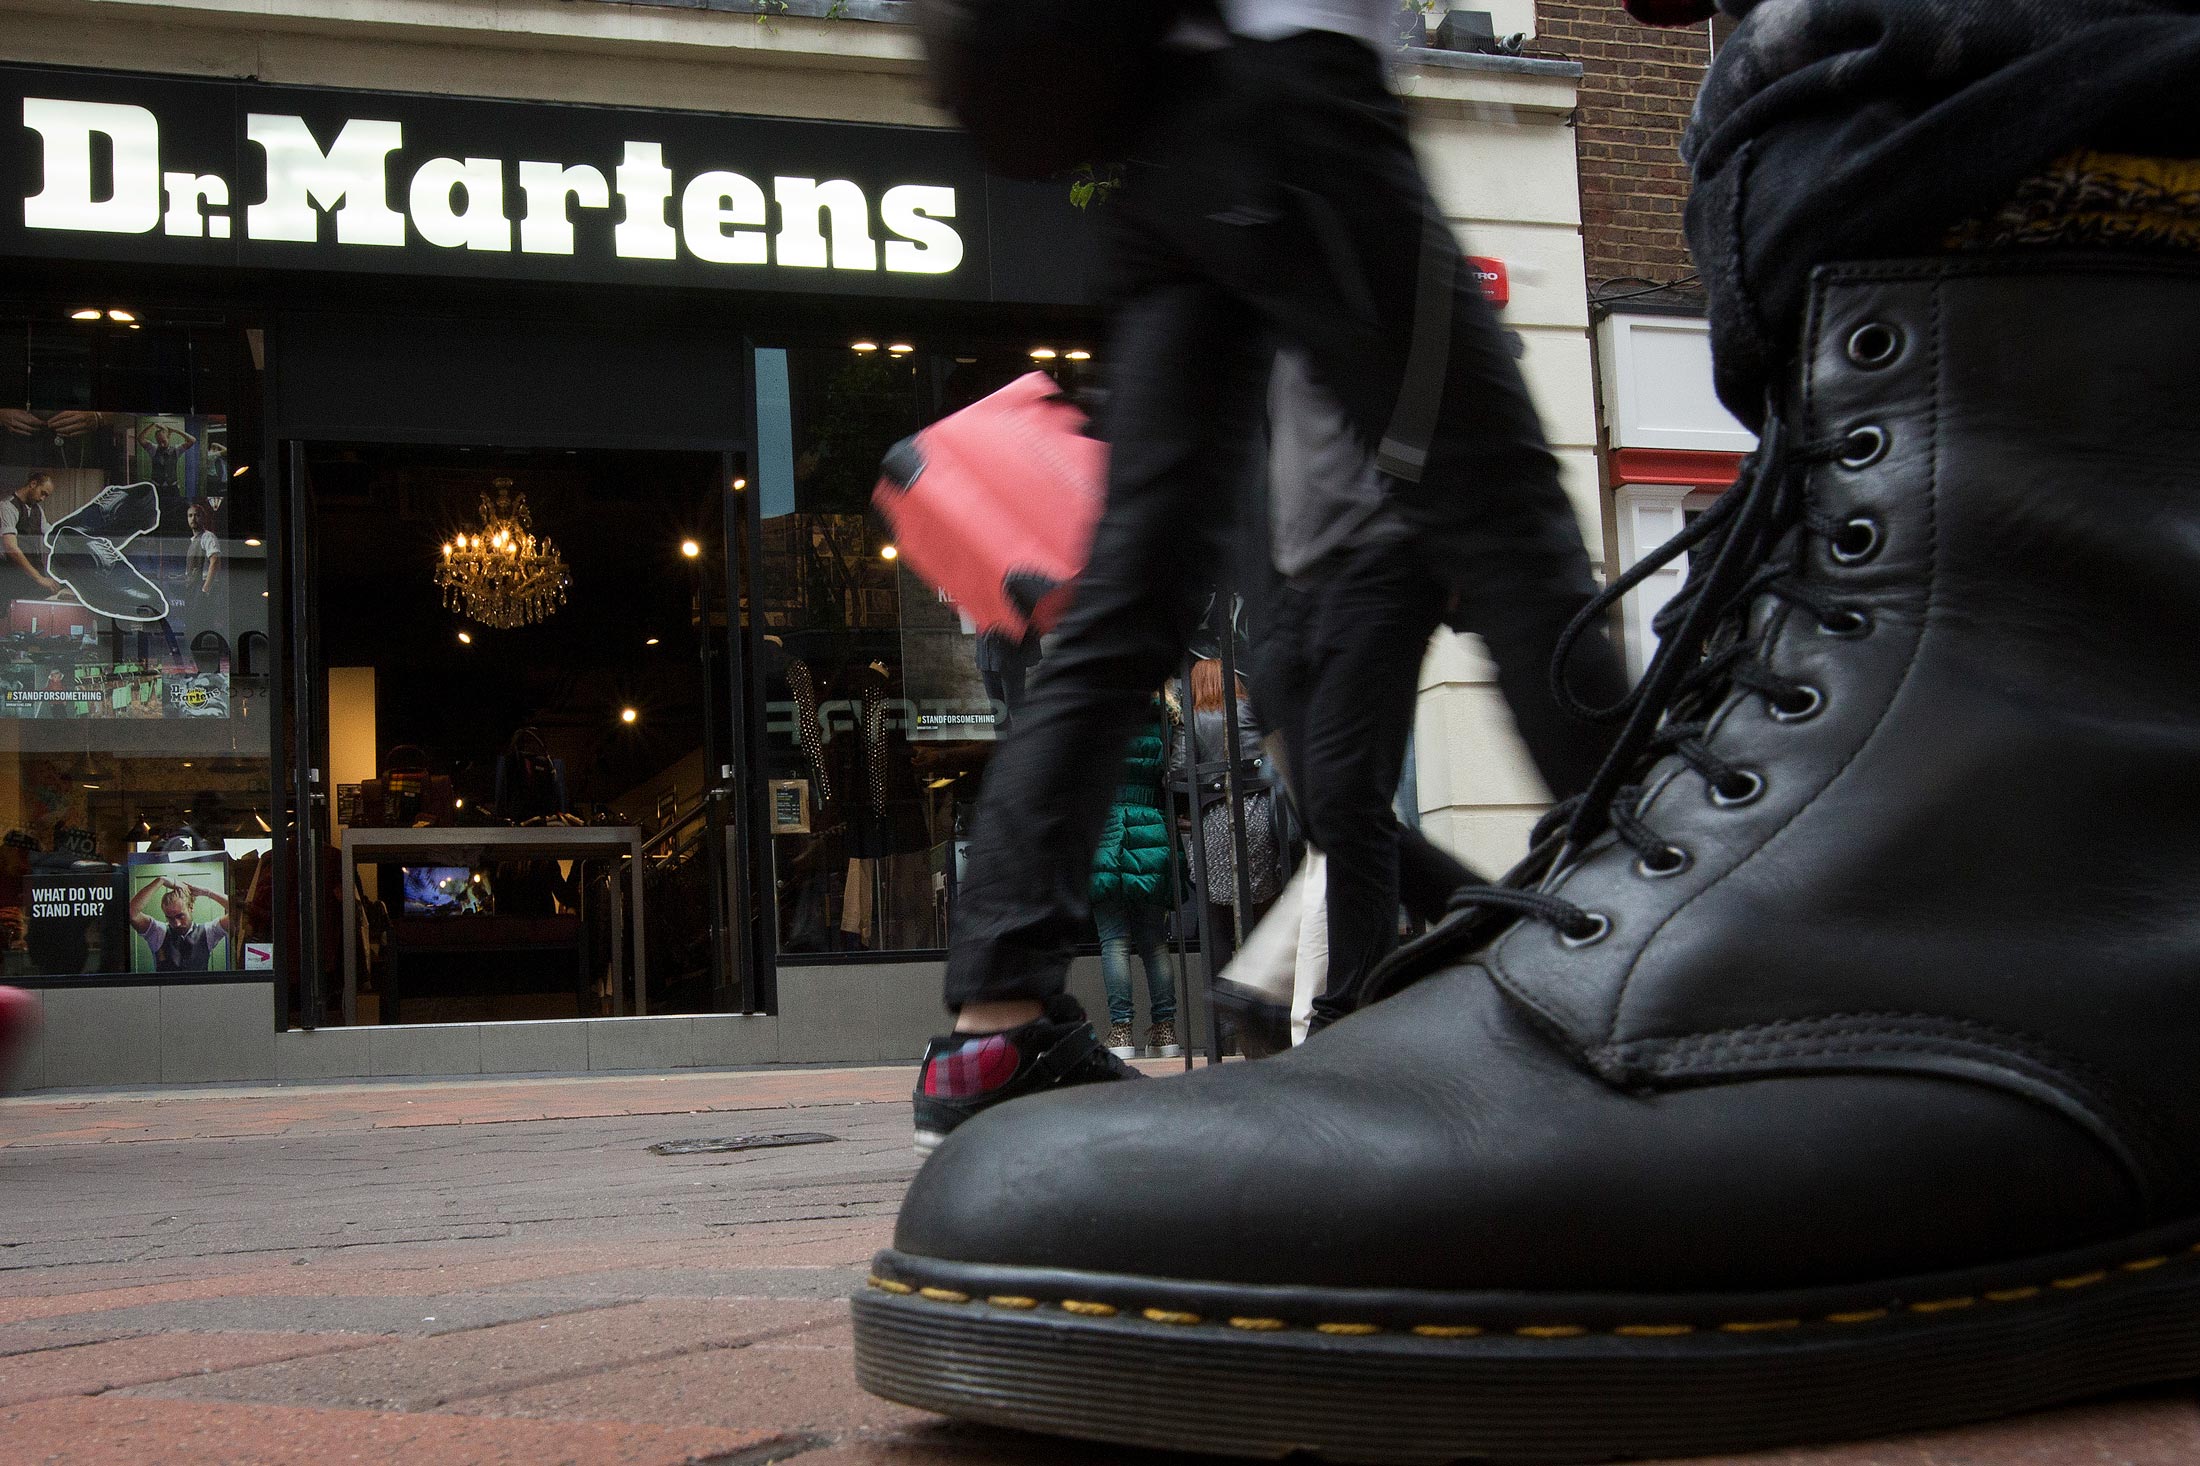 Dr. Martens Owner Is Said to Work With 